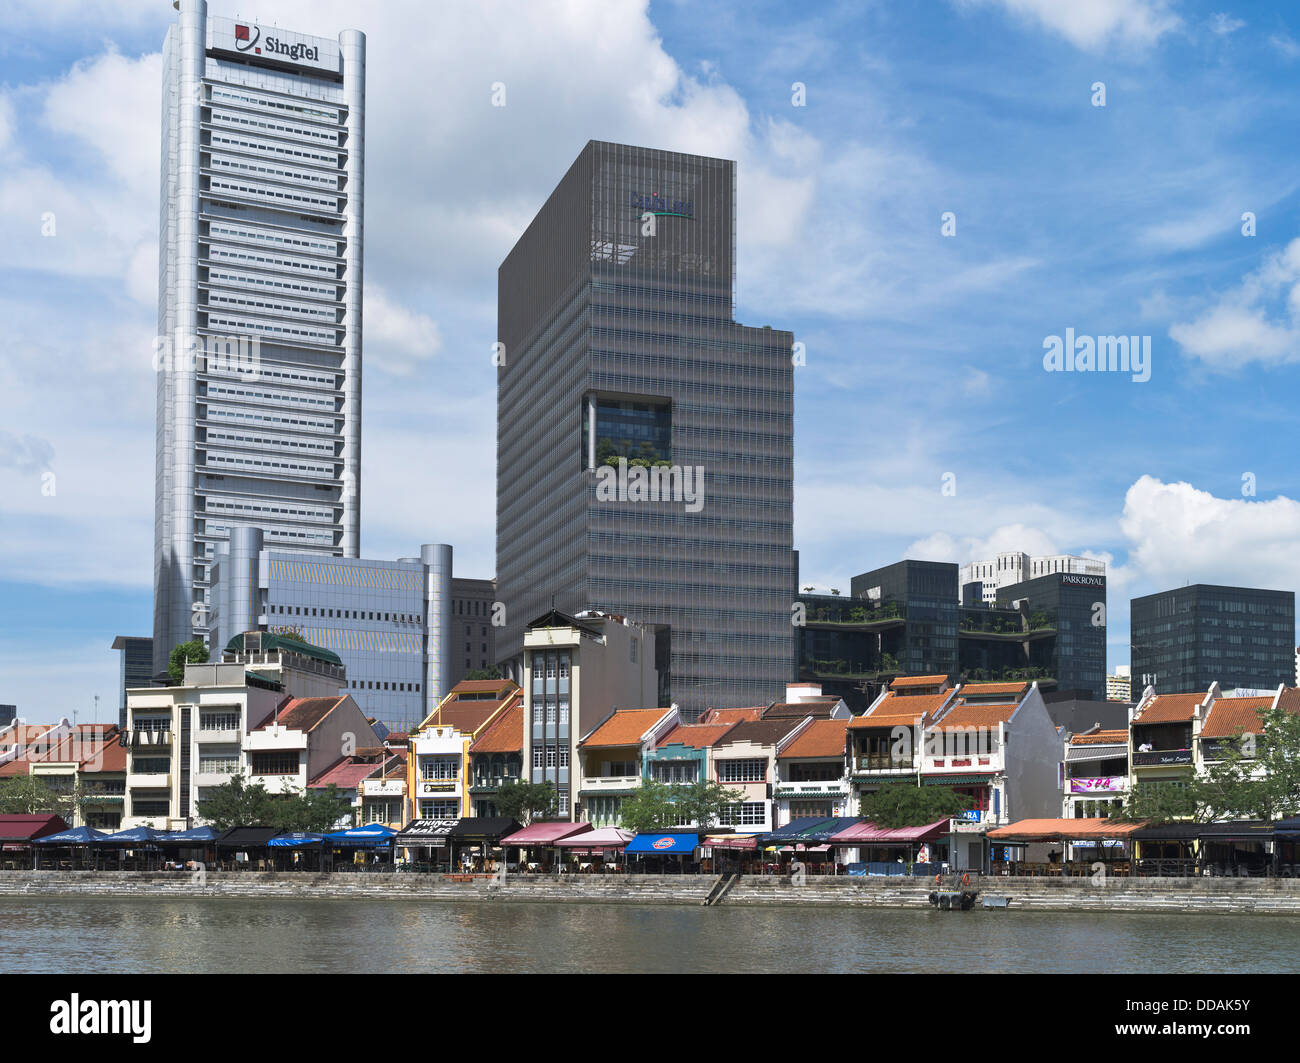 dh Singapore River BOAT QUAY SINGAPORE Old new buildings waterfront architecture Stock Photo